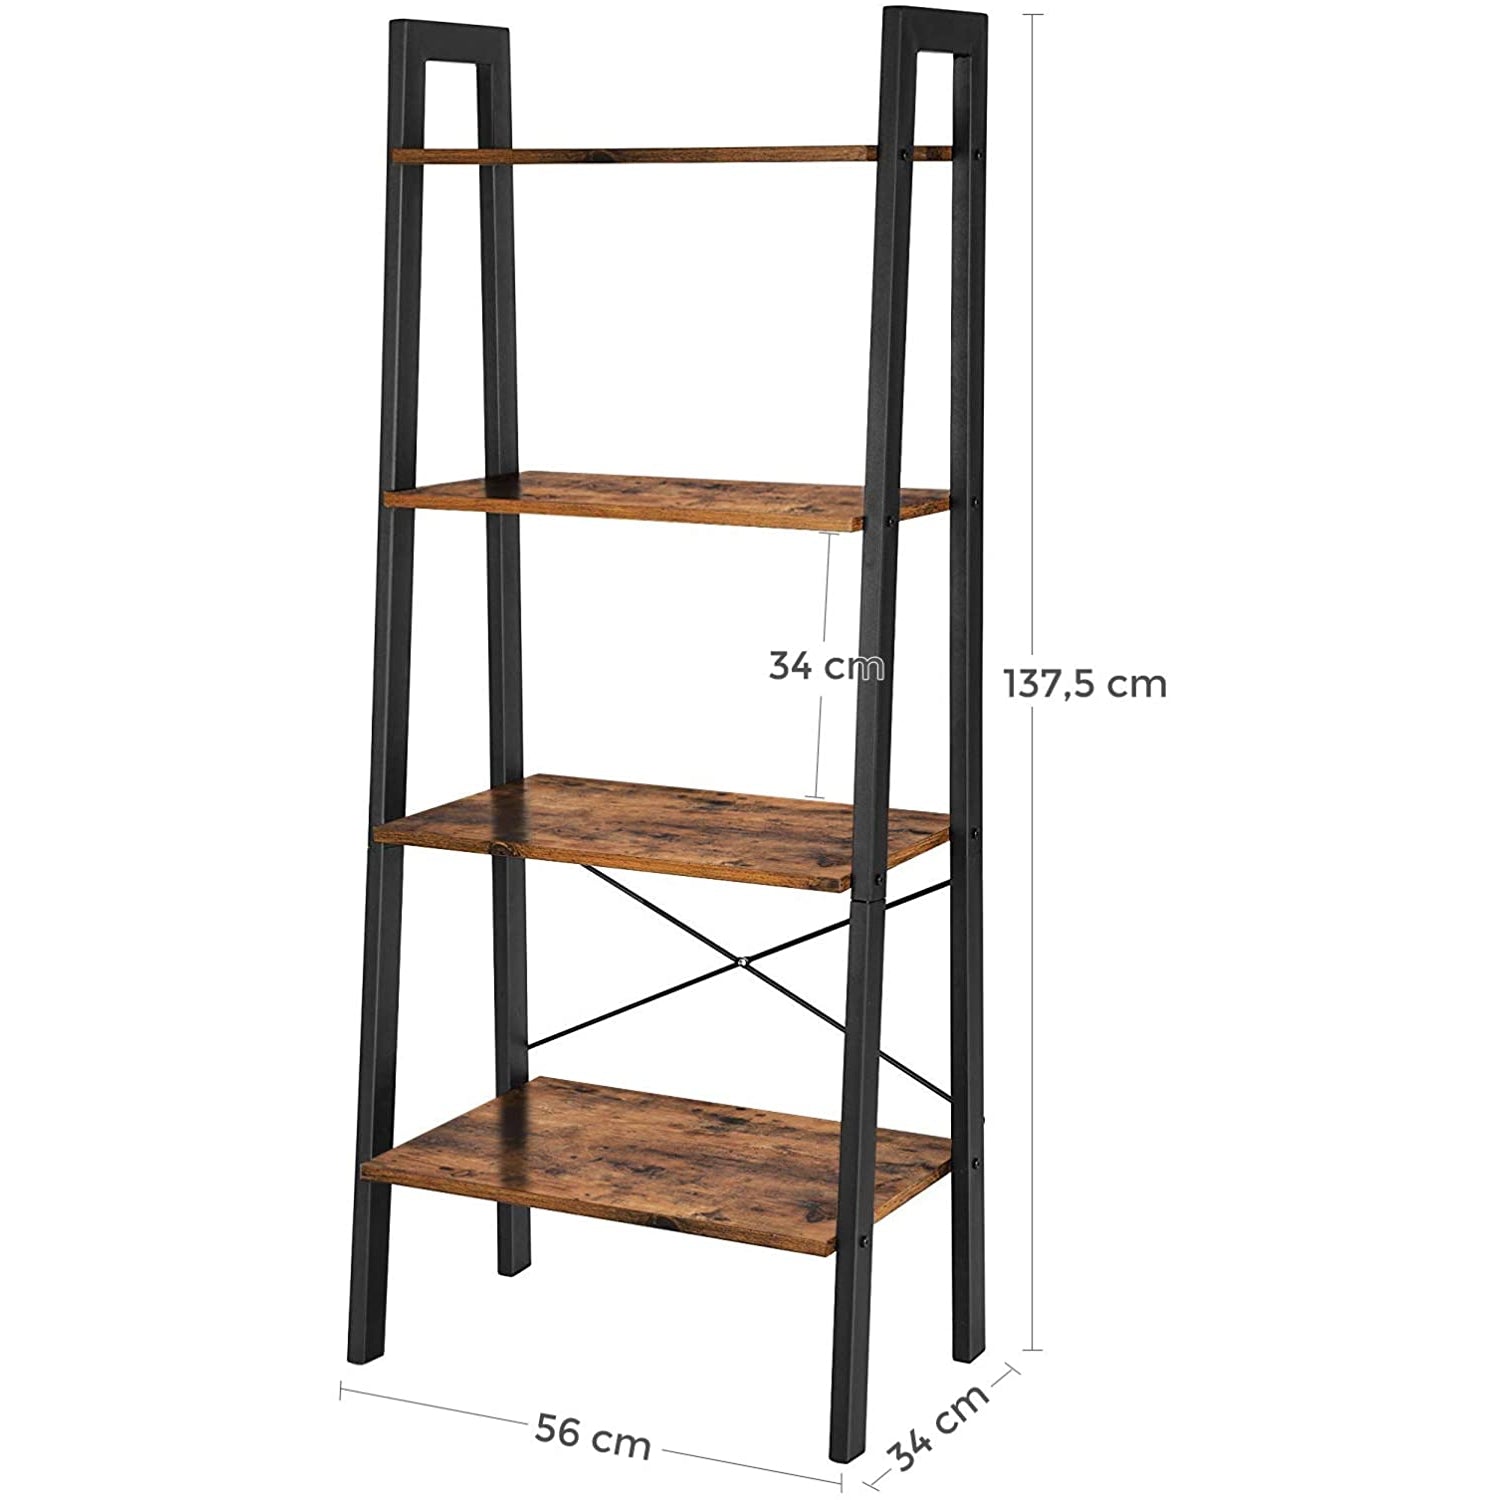 Nancy's Ladder Cabinet - Standing Bookcase 4 Layers - Industrial 56 x 34 x 137.5 cm